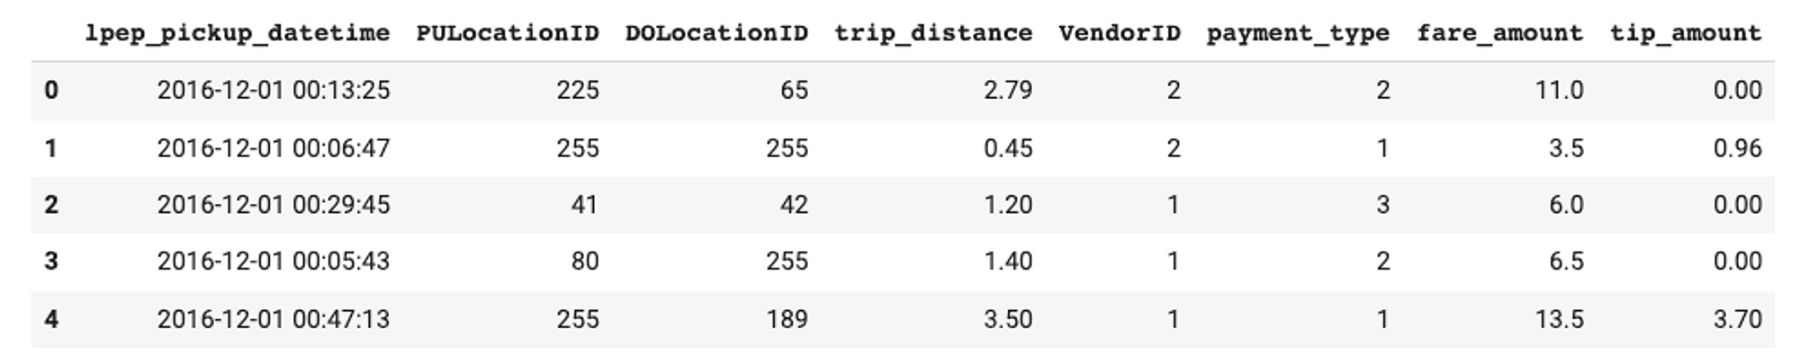 Snapshot of the NYC Green Taxi Dataset